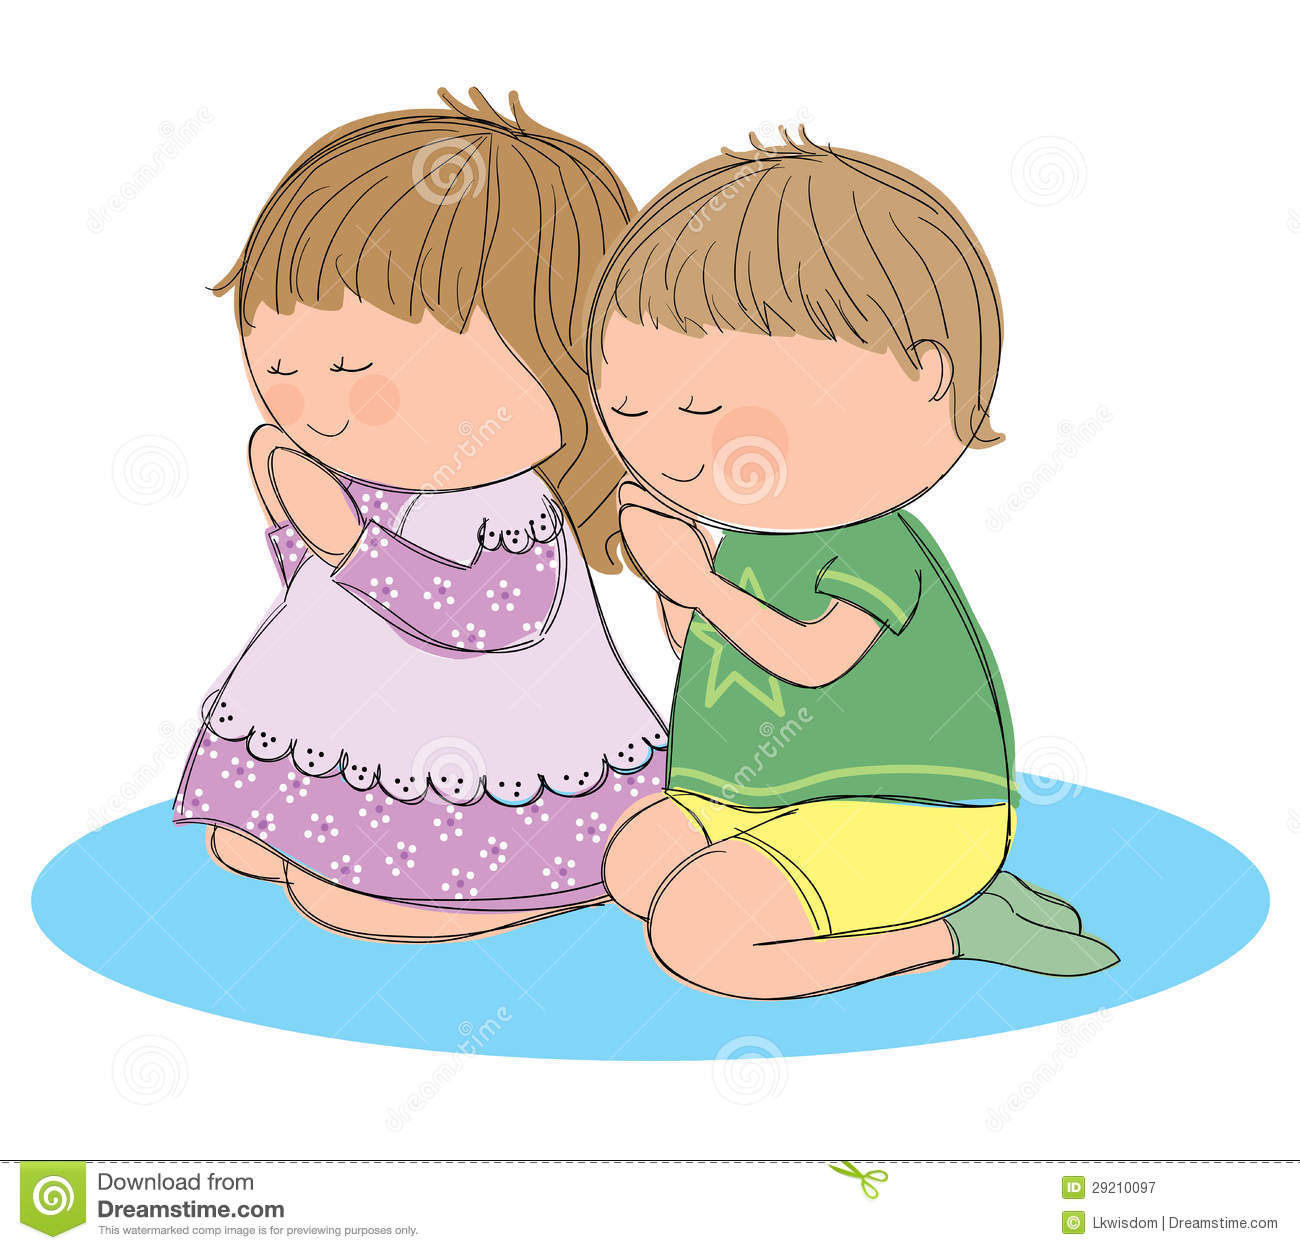 Hand Drawn Picture Of Two Children Praying Illustrated In A Loose